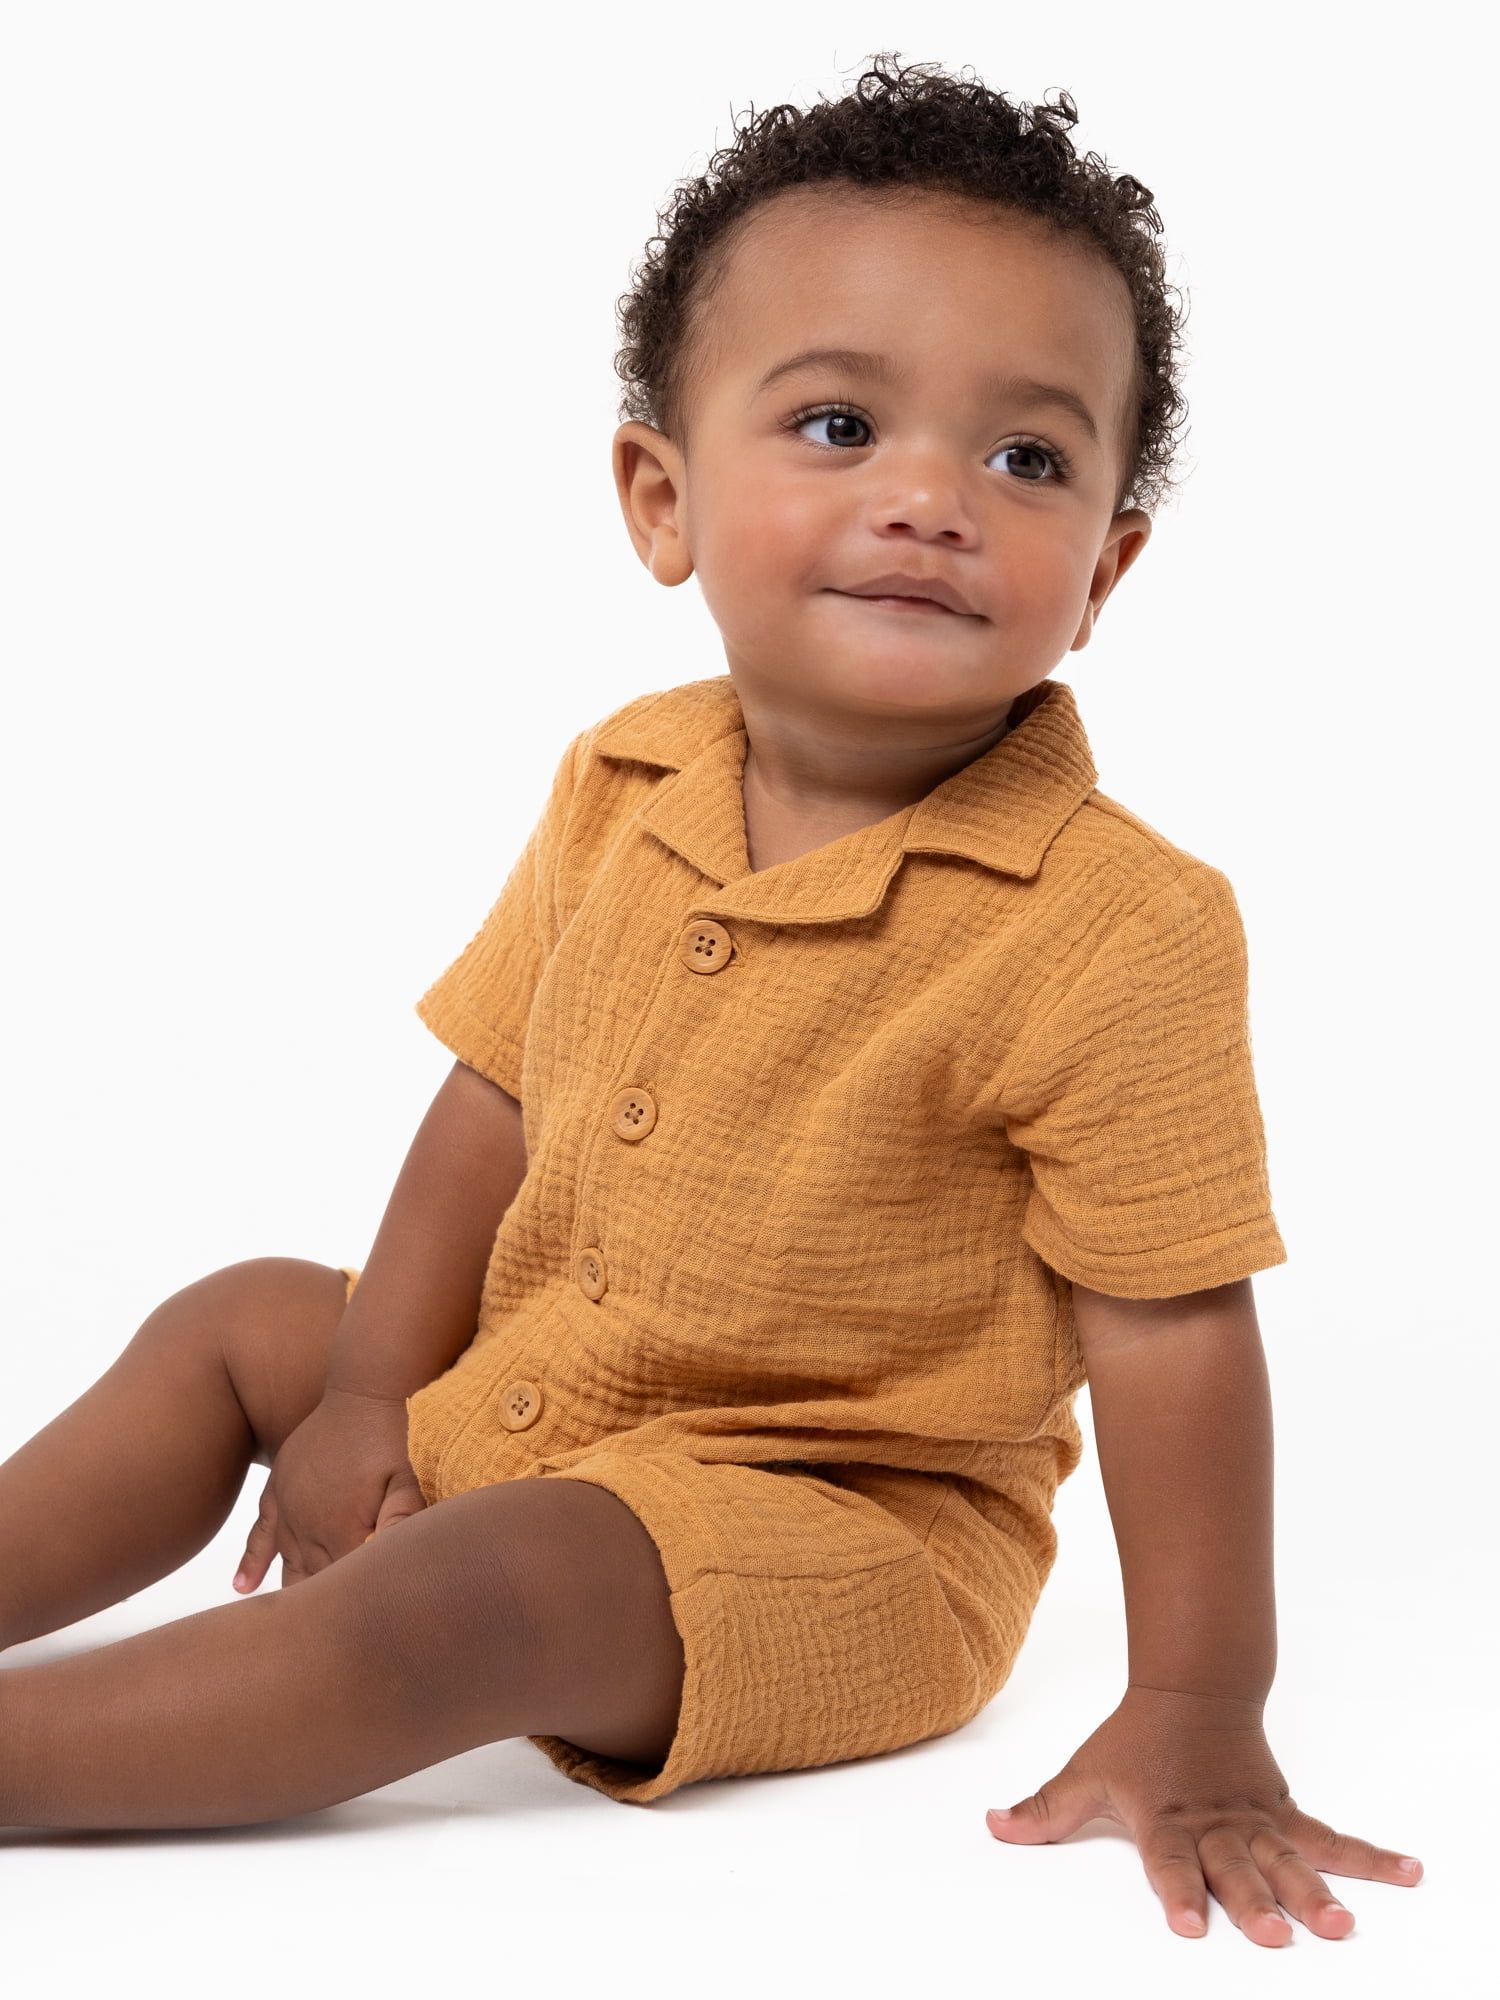 Modern Moments by Gerber Baby Boy Short Sleeve Collared Romper, Sizes 0/3 Months - 24 Months | Walmart (US)